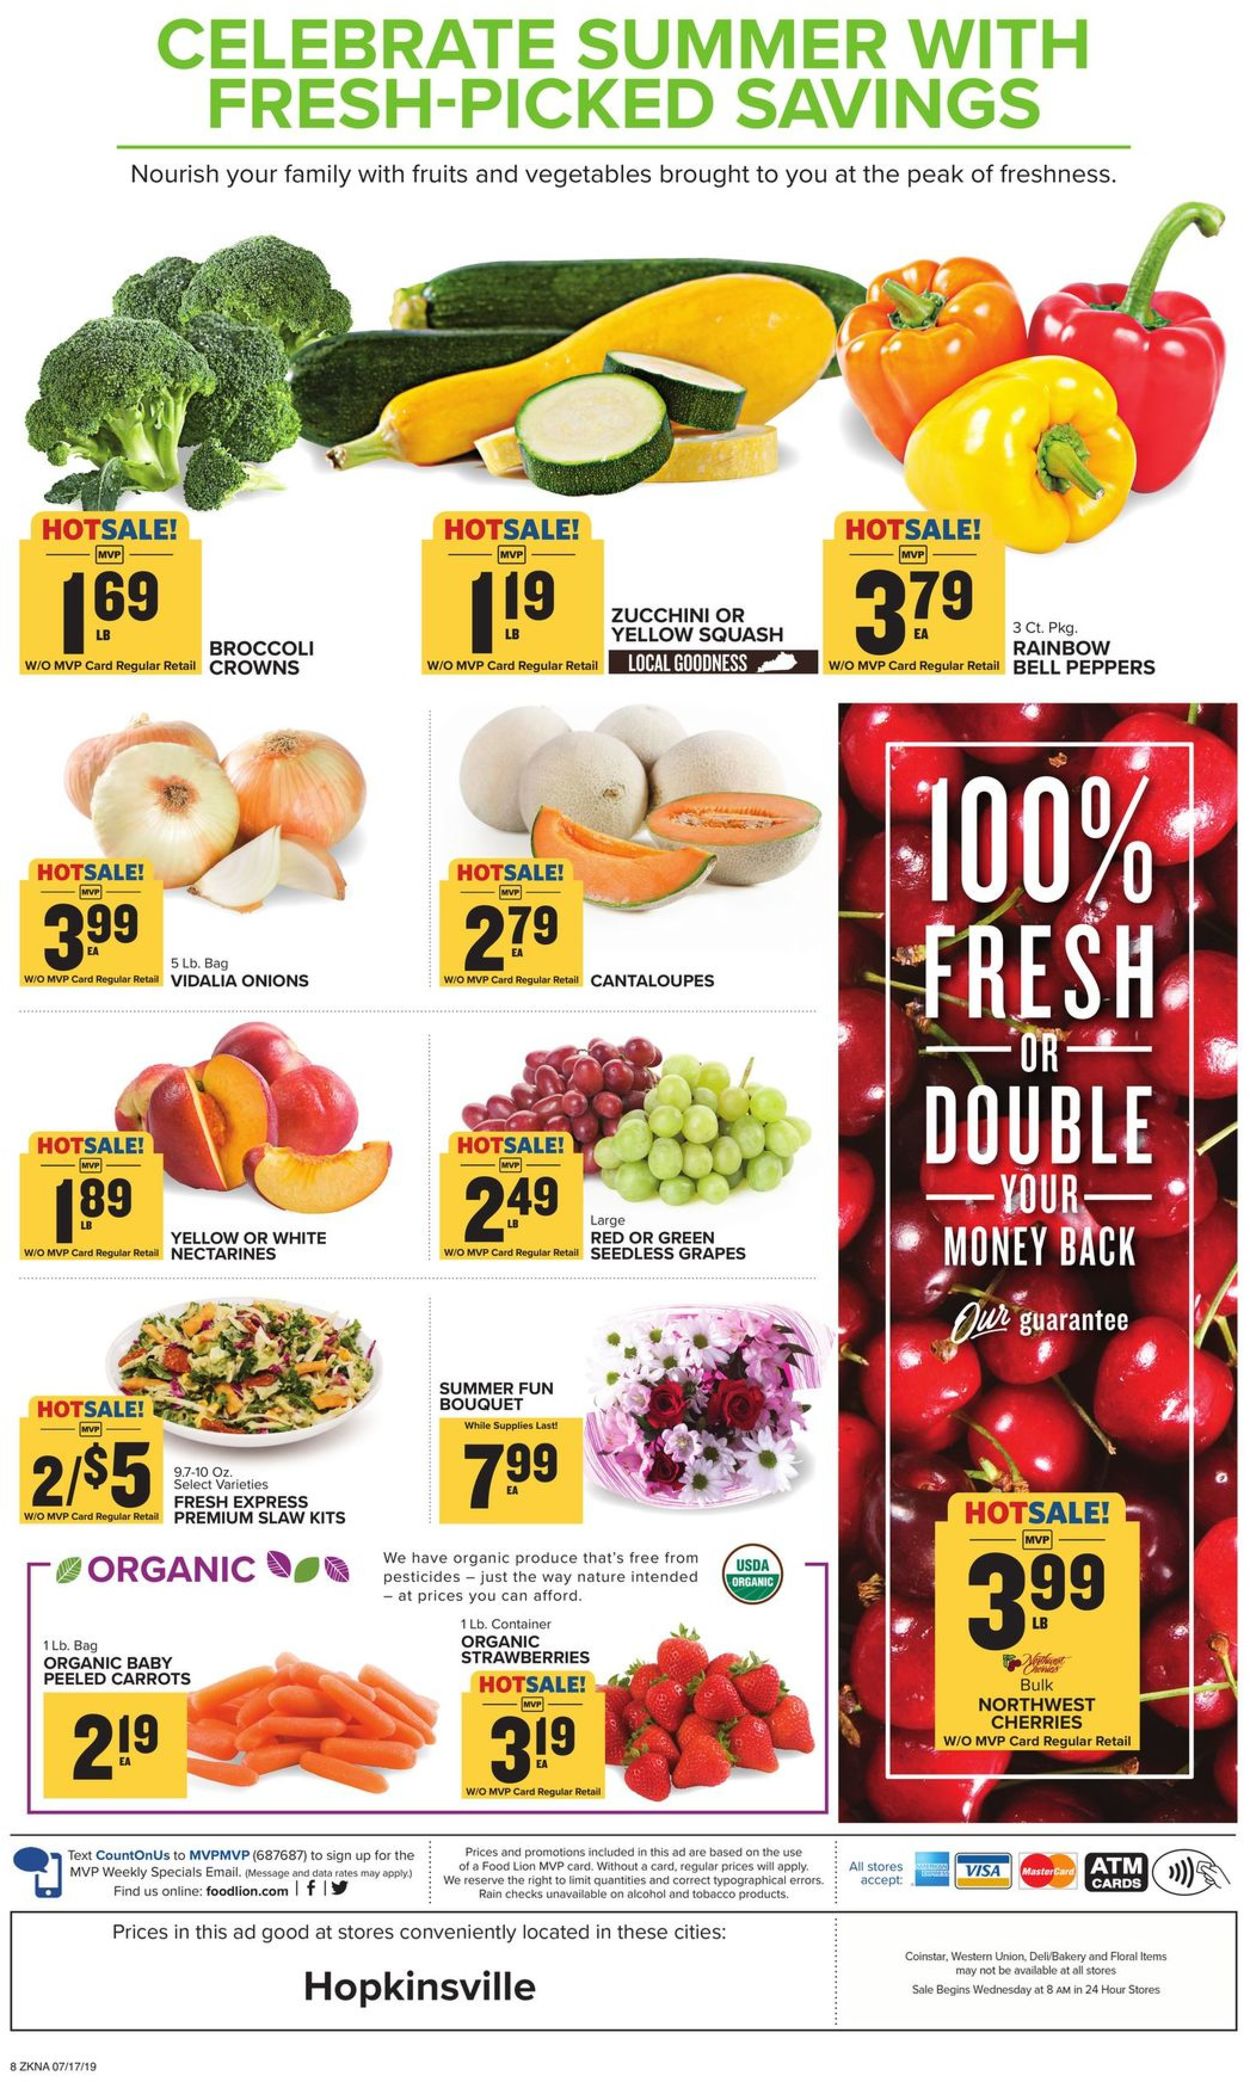 Catalogue Food Lion from 07/17/2019